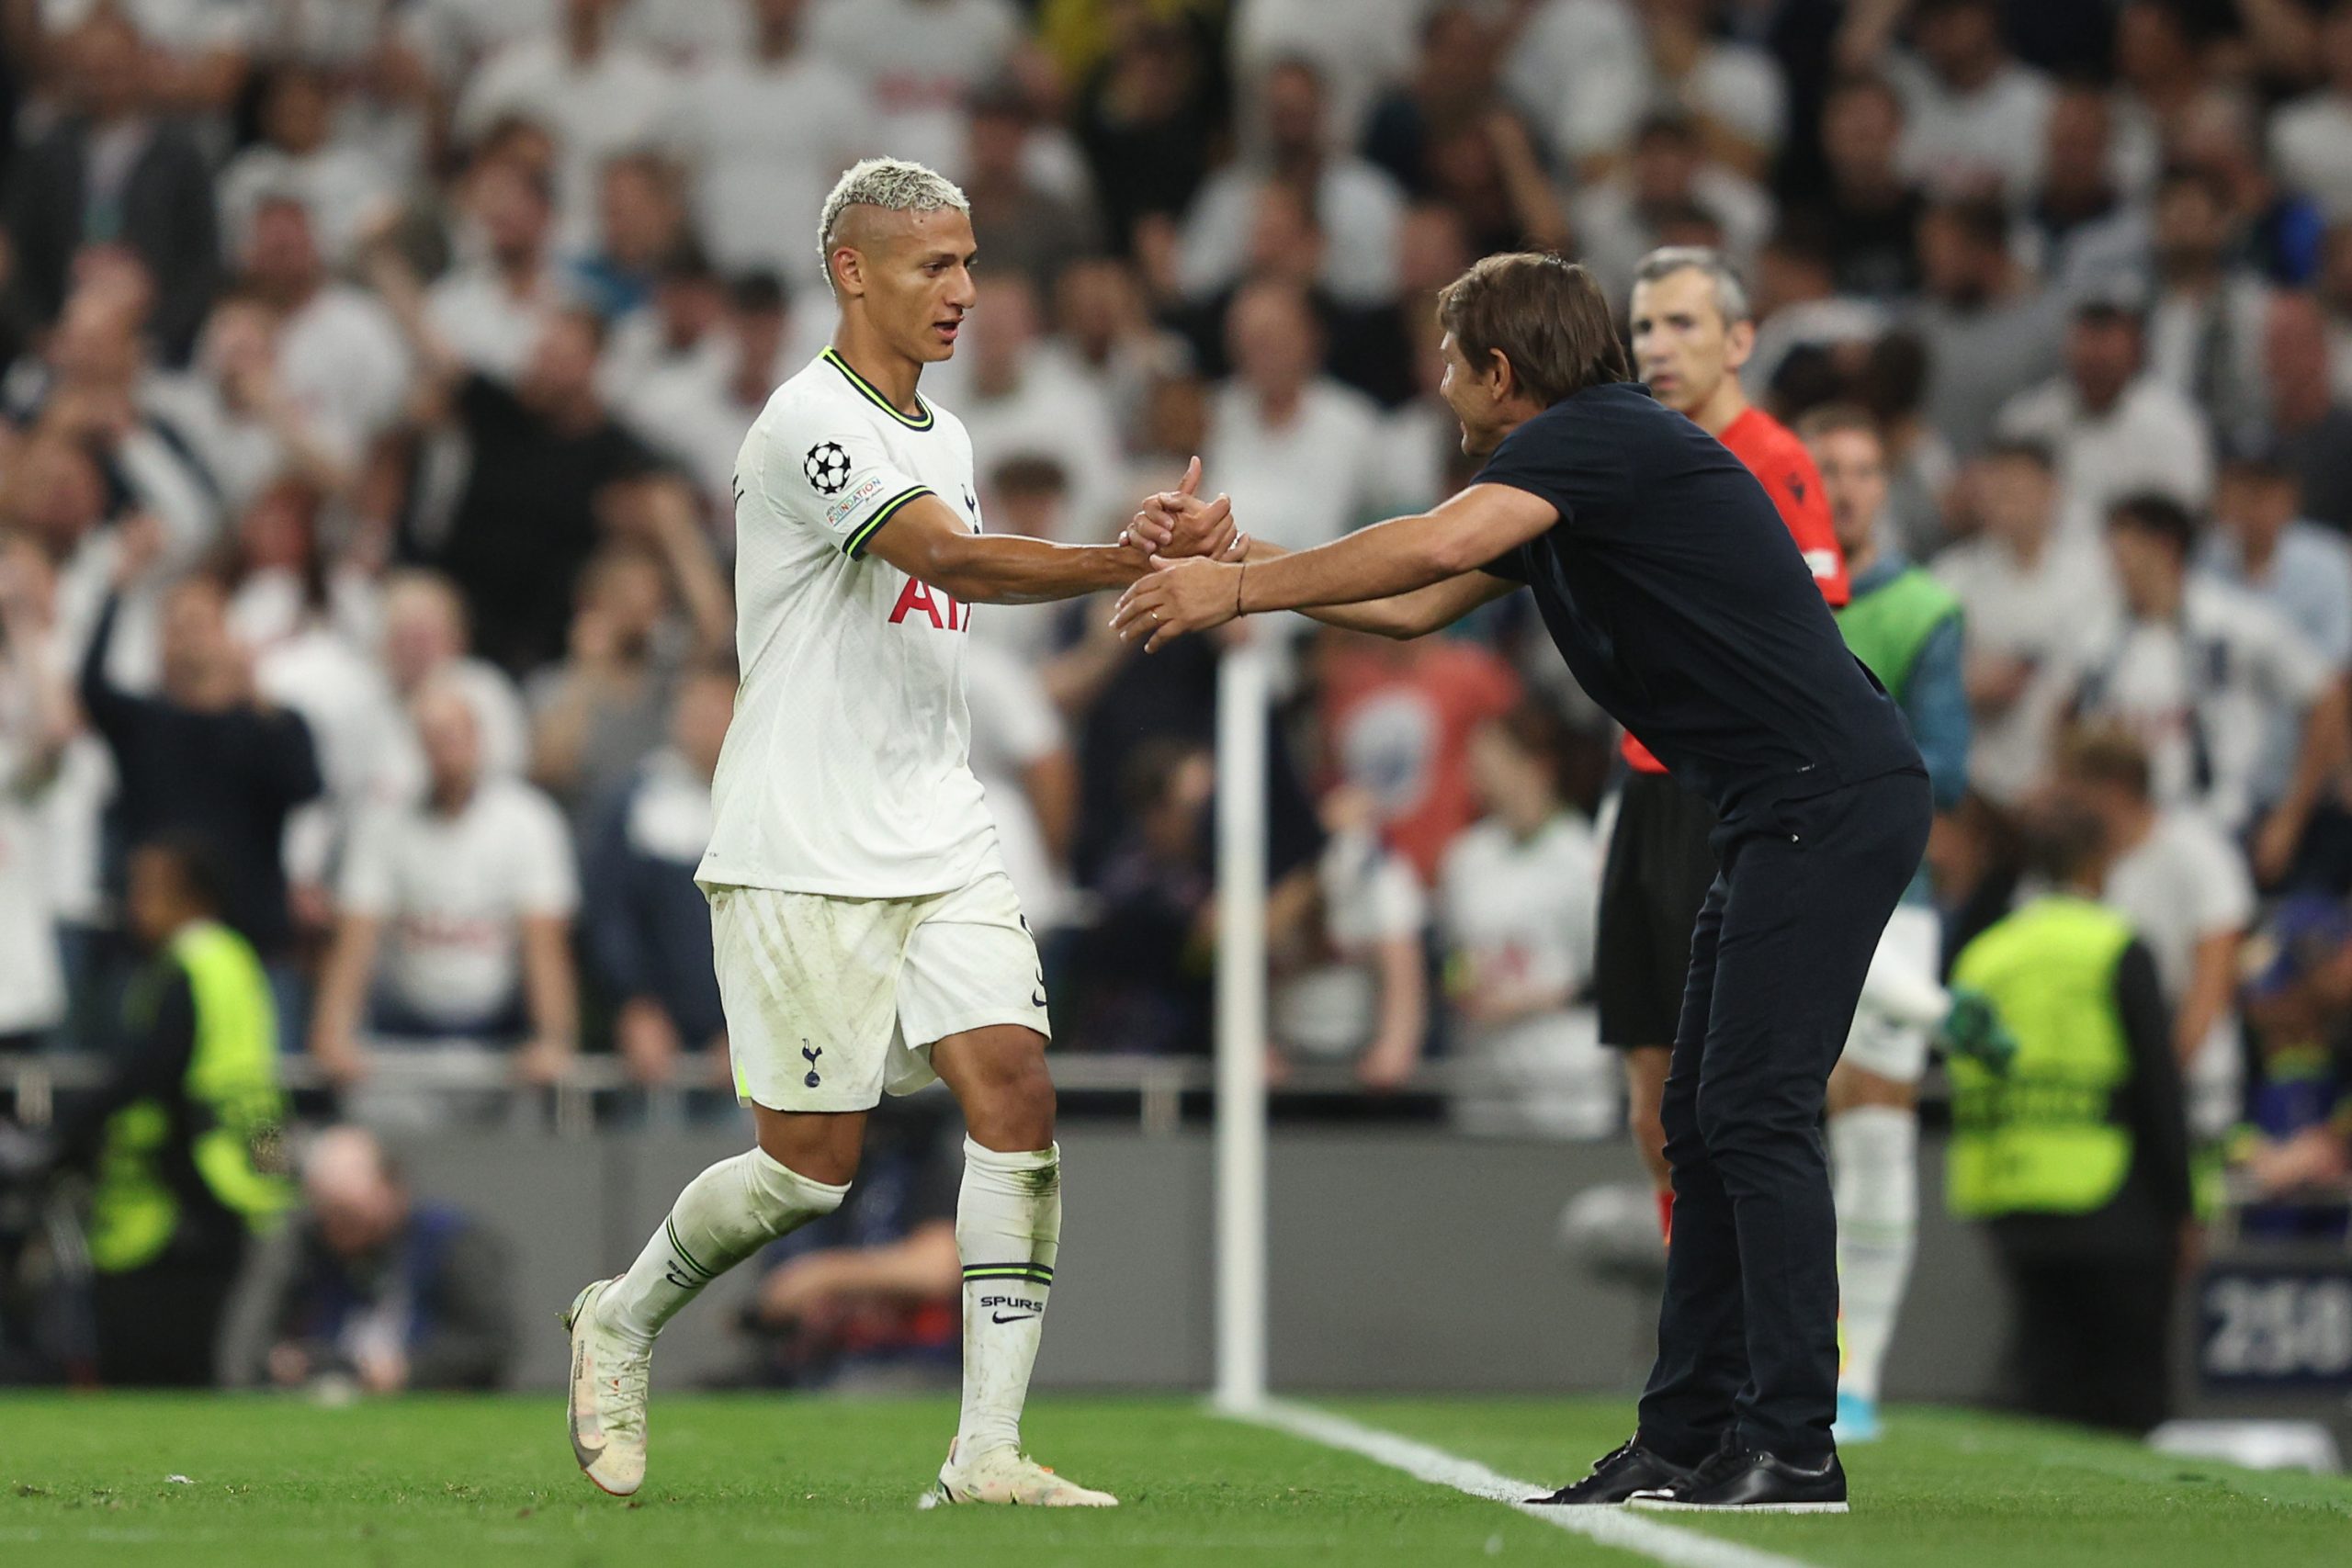 Richarlison was the hero for Tottenham Hotspur on his Champions League debut.